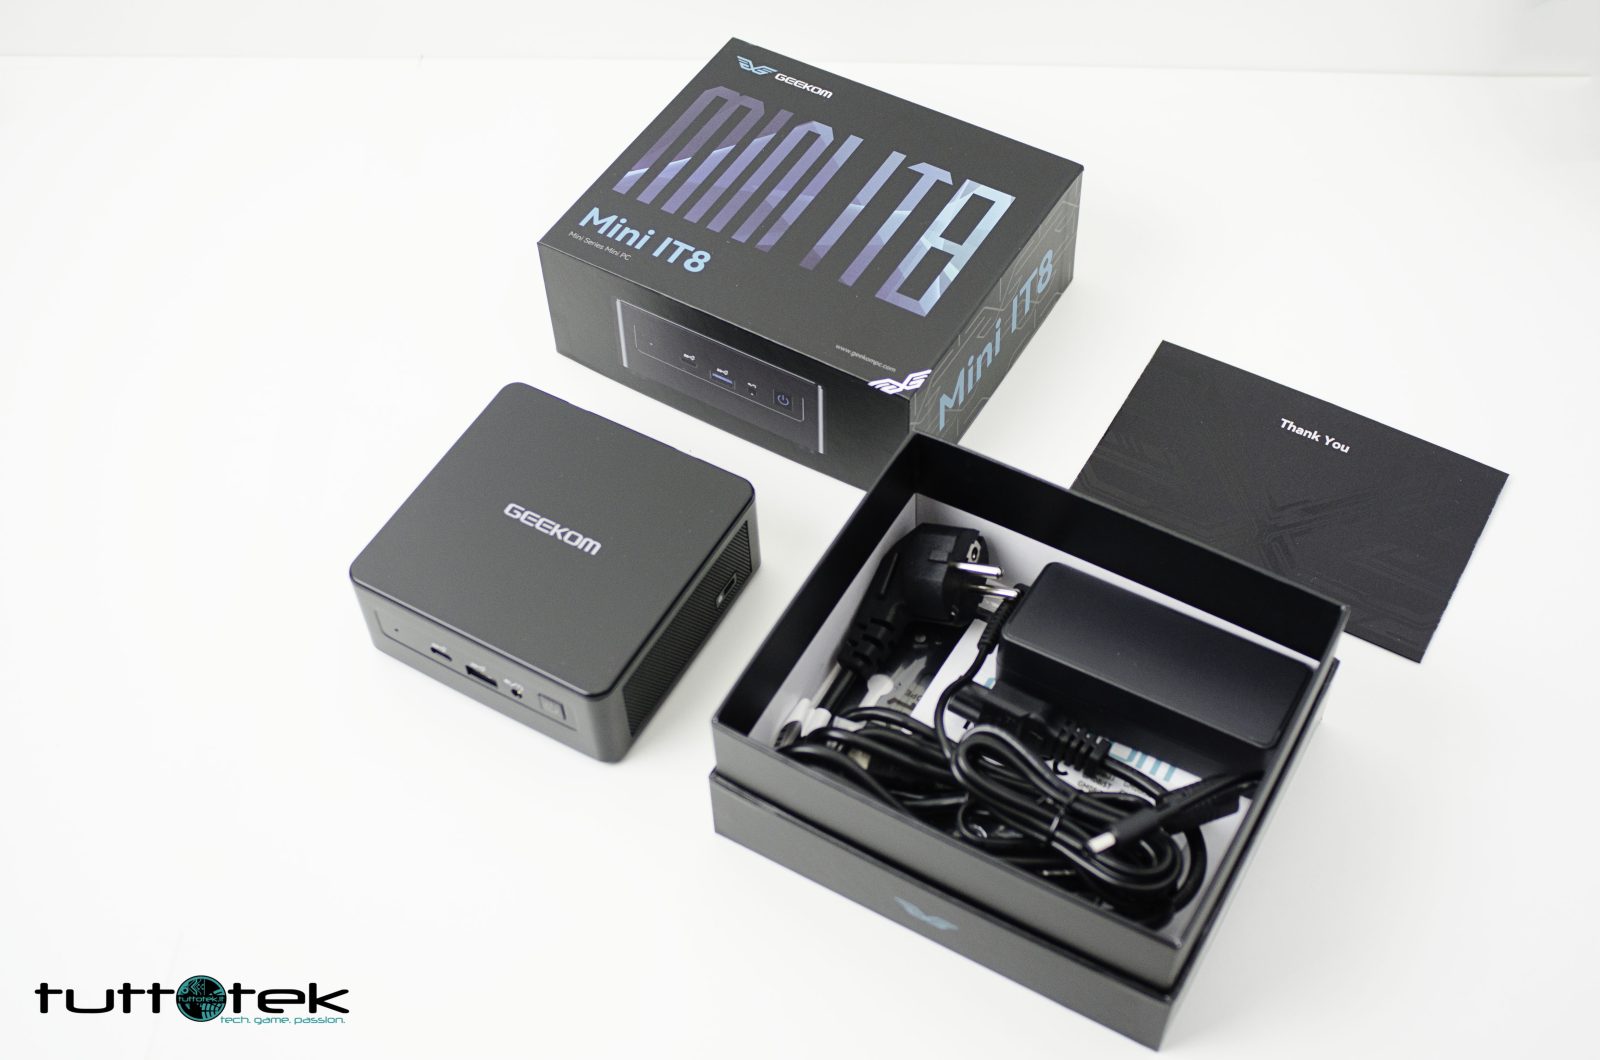 GEEKOM Mini IT8 review: a simple and effective mini PC